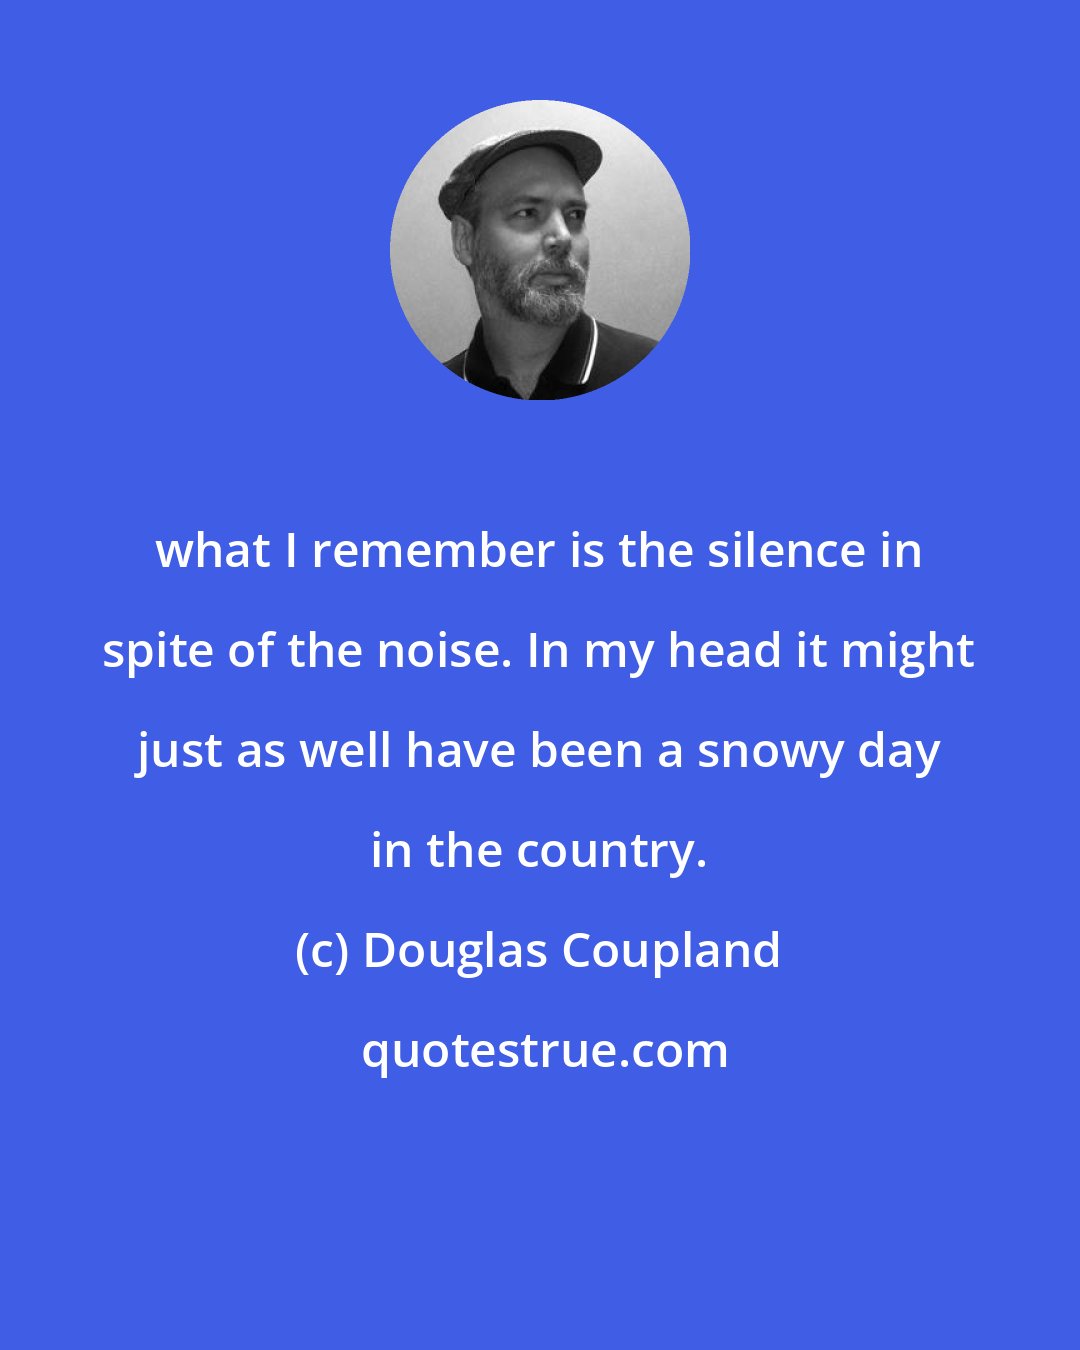 Douglas Coupland: what I remember is the silence in spite of the noise. In my head it might just as well have been a snowy day in the country.